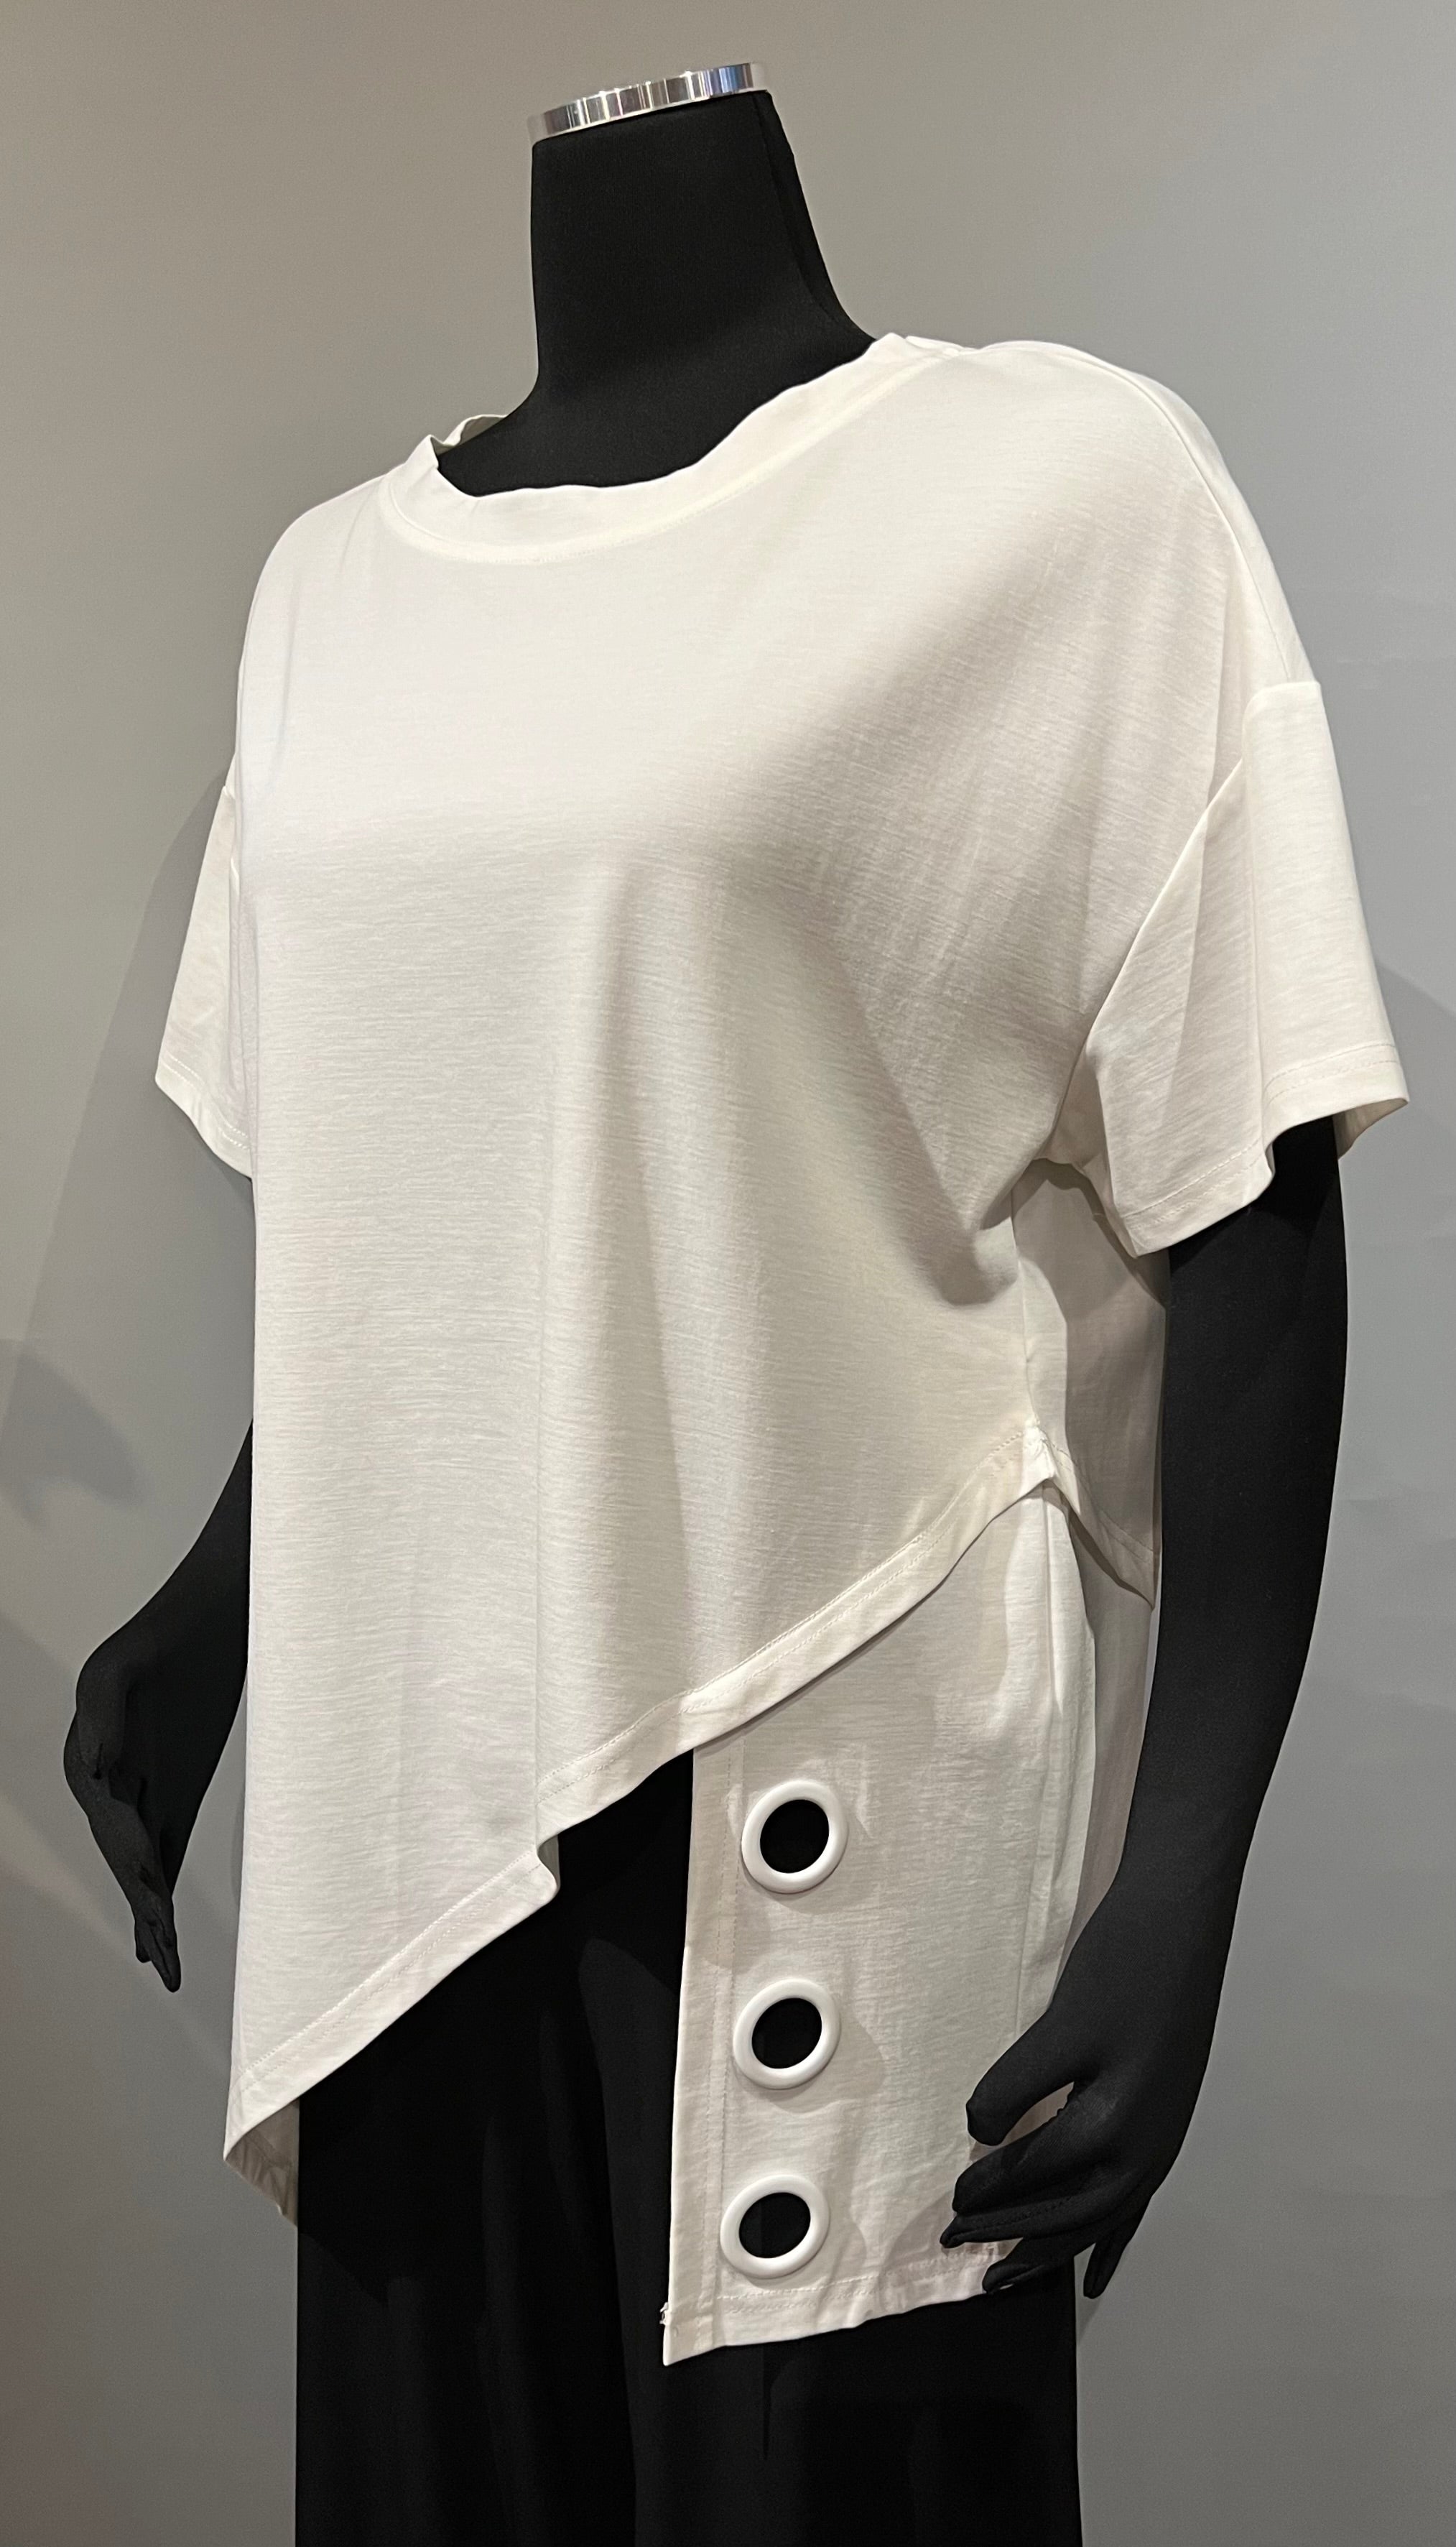 Vanité Couture 1196WT White One Size Short Sleeve Tee Asymmetric Hem With Grommets